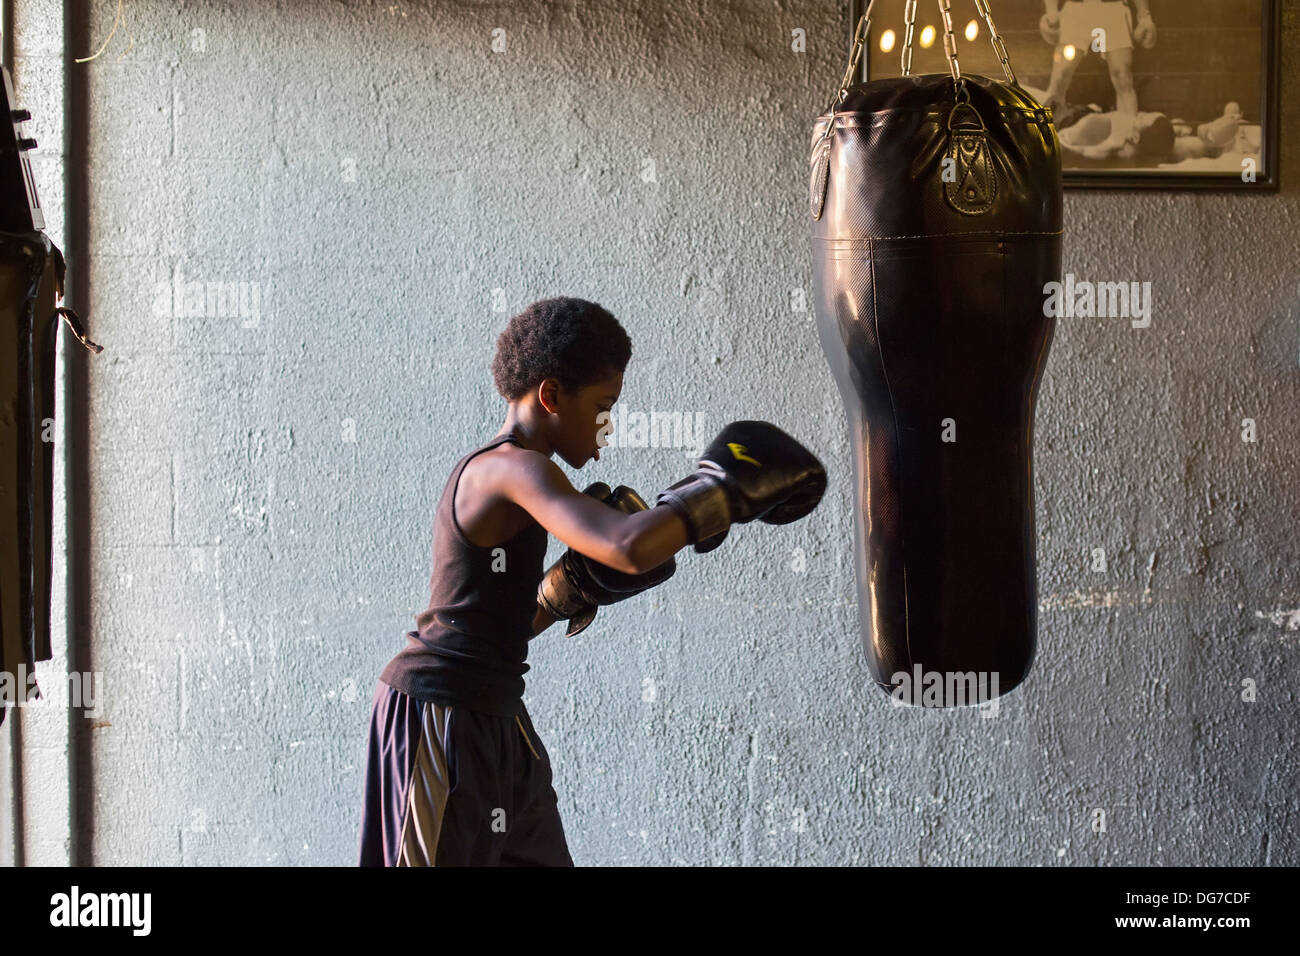 Detroit's Downtown Youth Boxing Gym Stock Photo